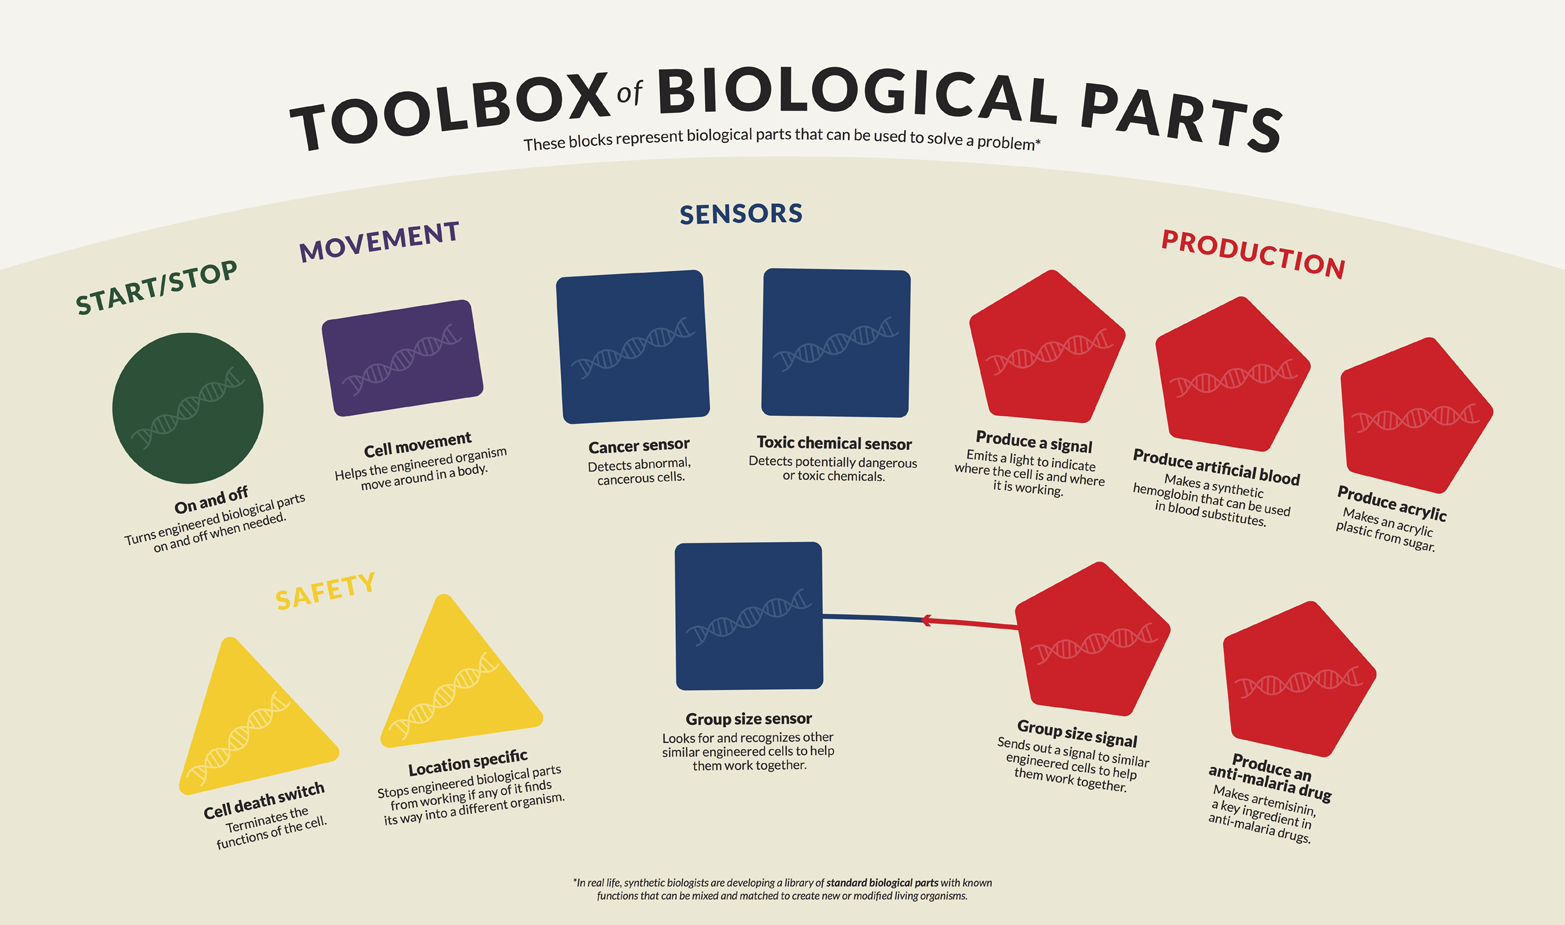 Toolbox of biological parts